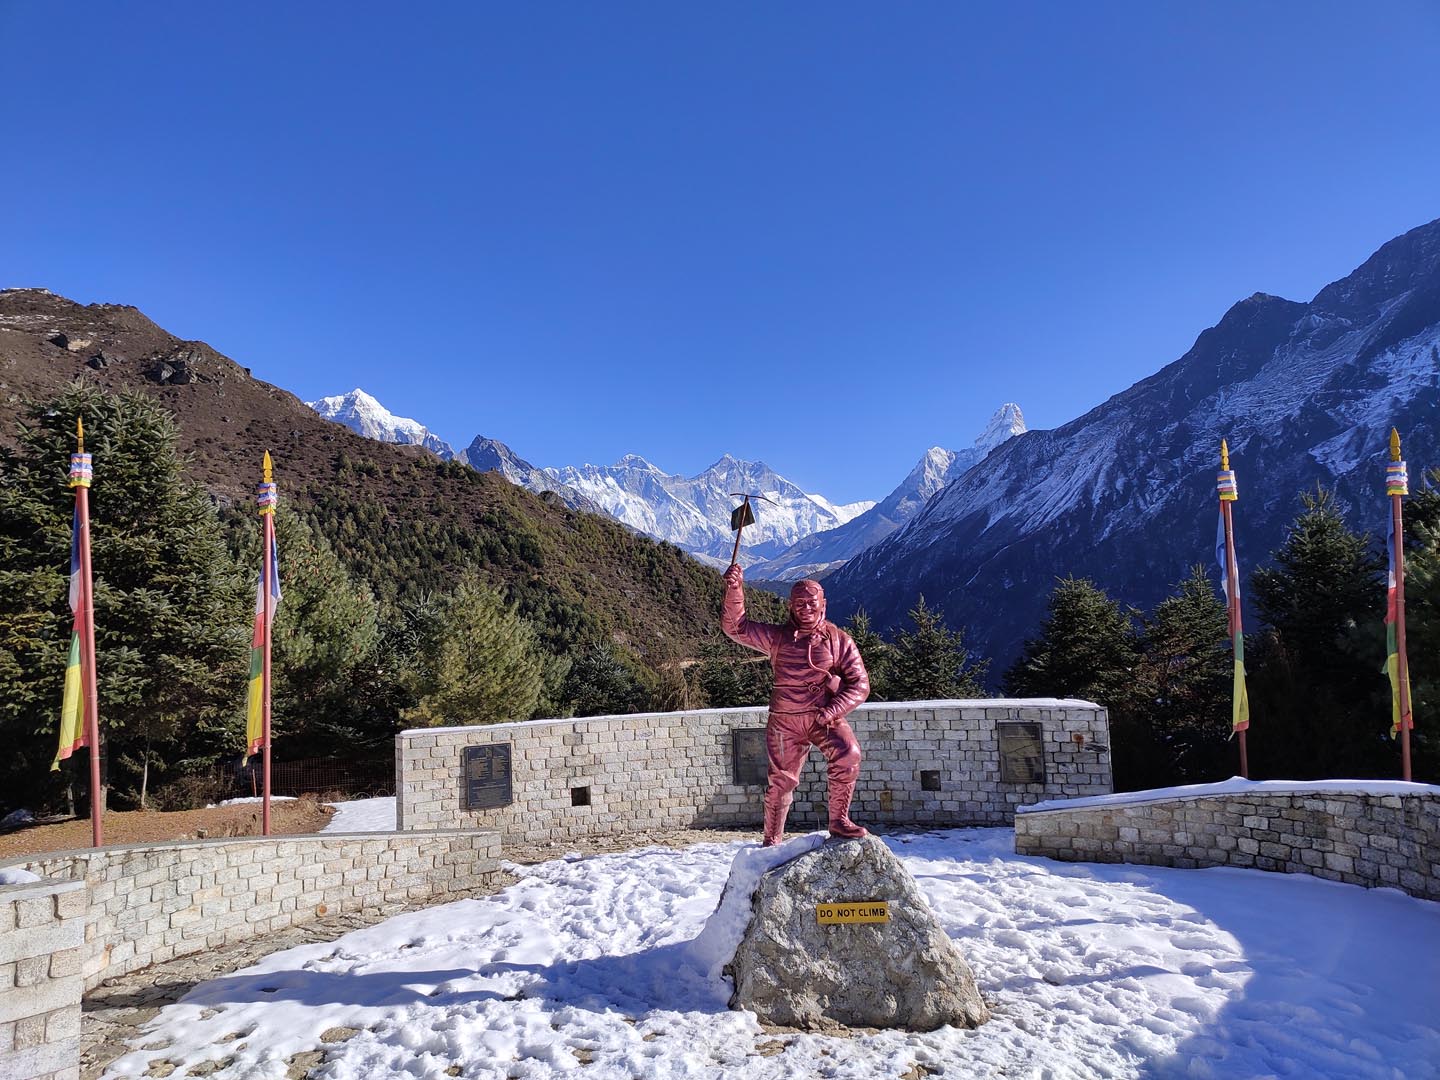 Sherpa museum at Namche